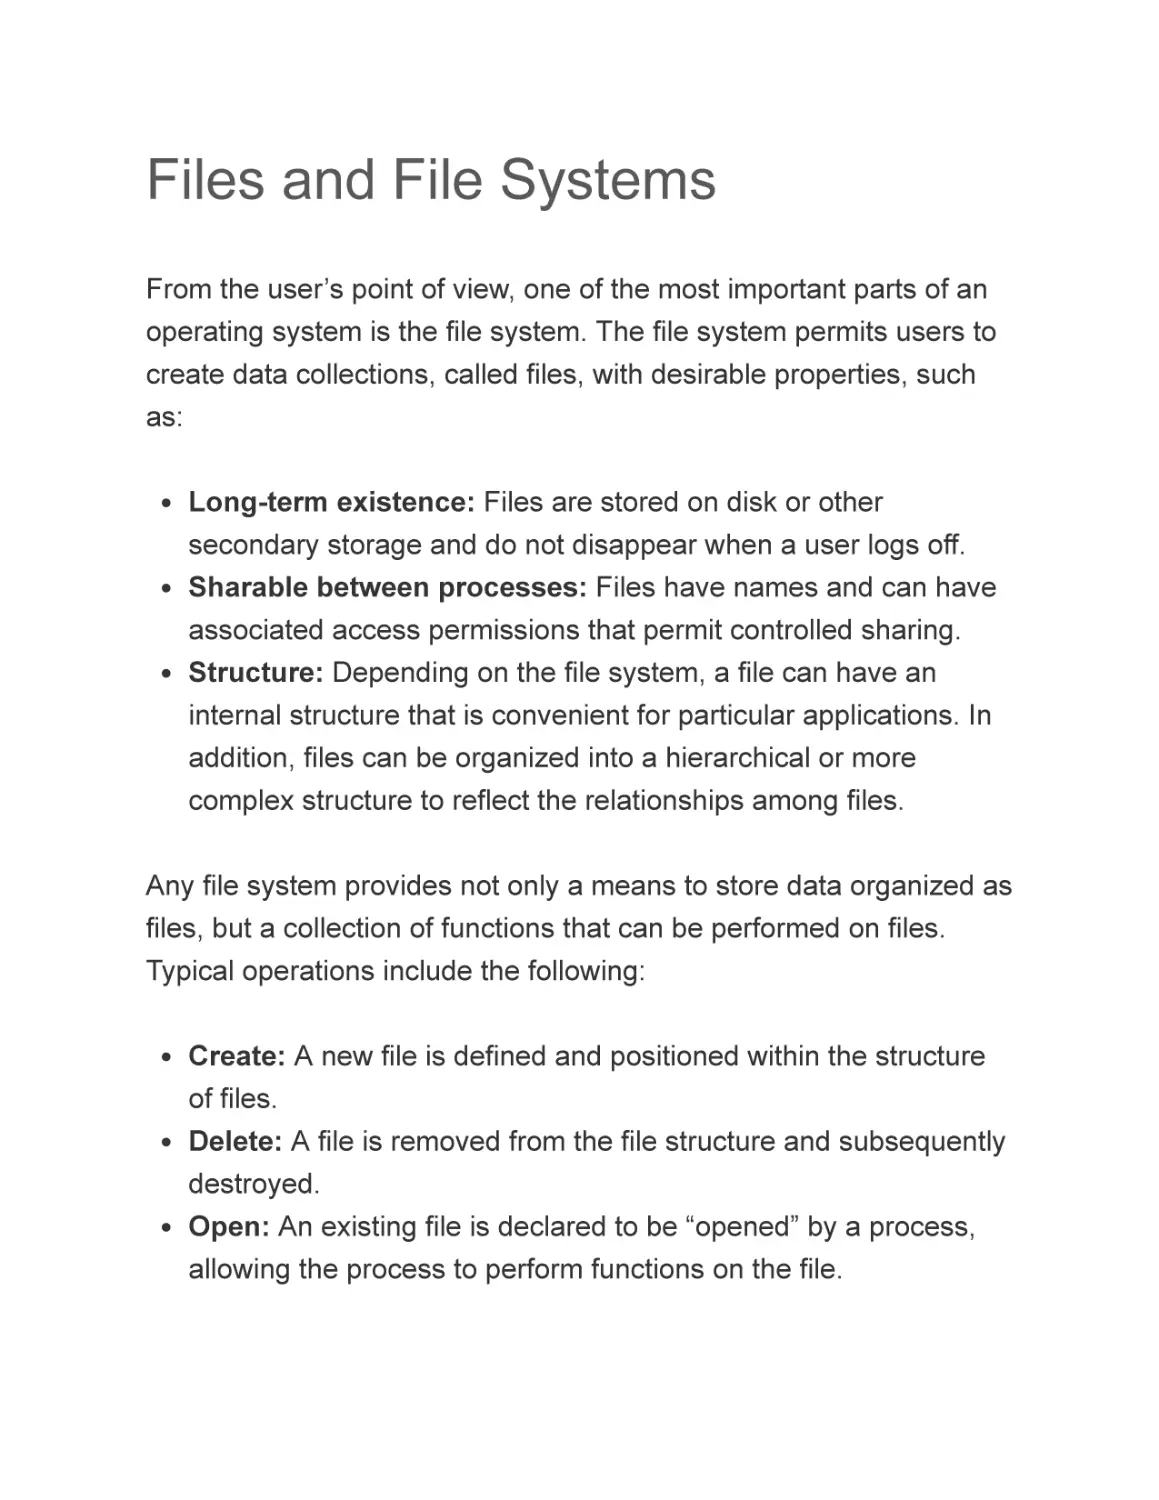 Files and File Systems